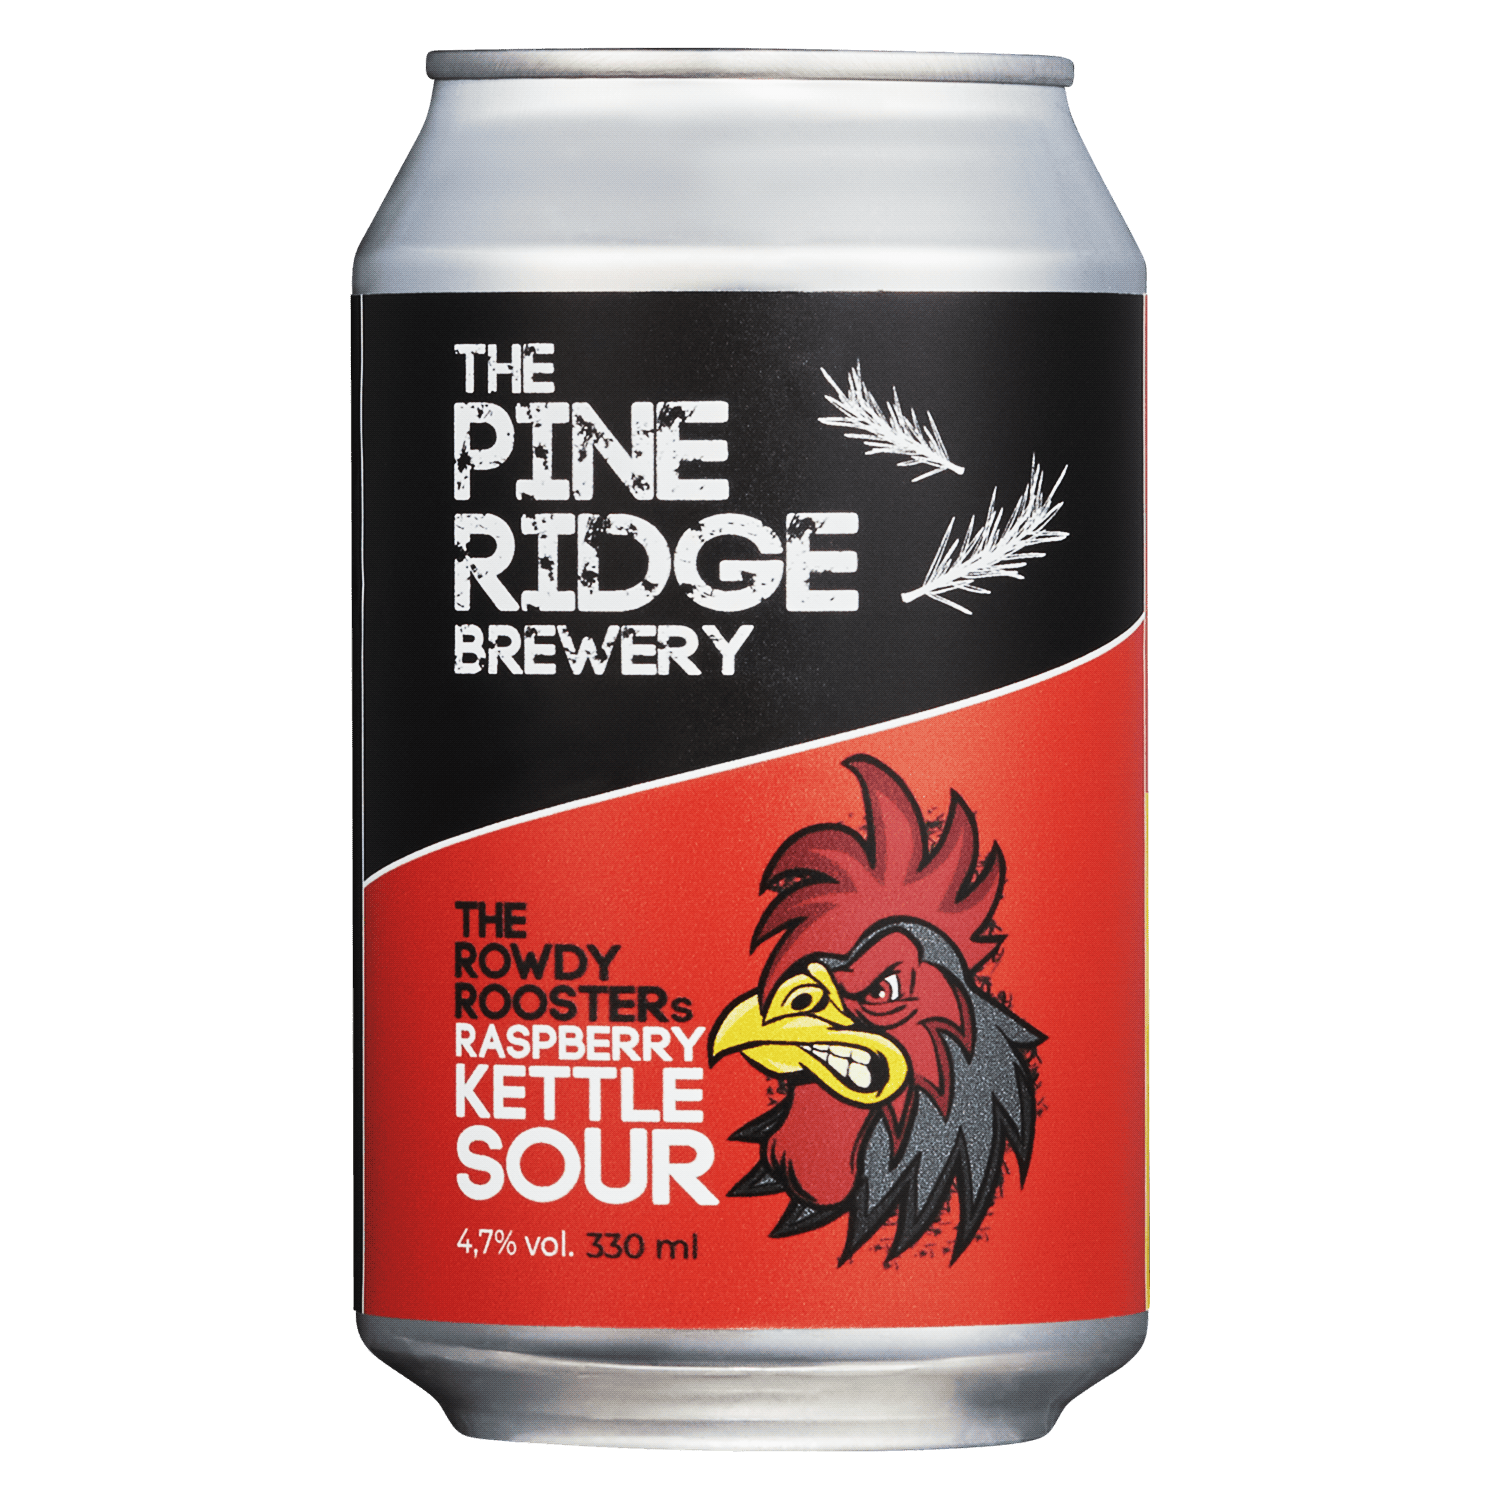 The Rowdy Roosters Raspbery Kettle Sour